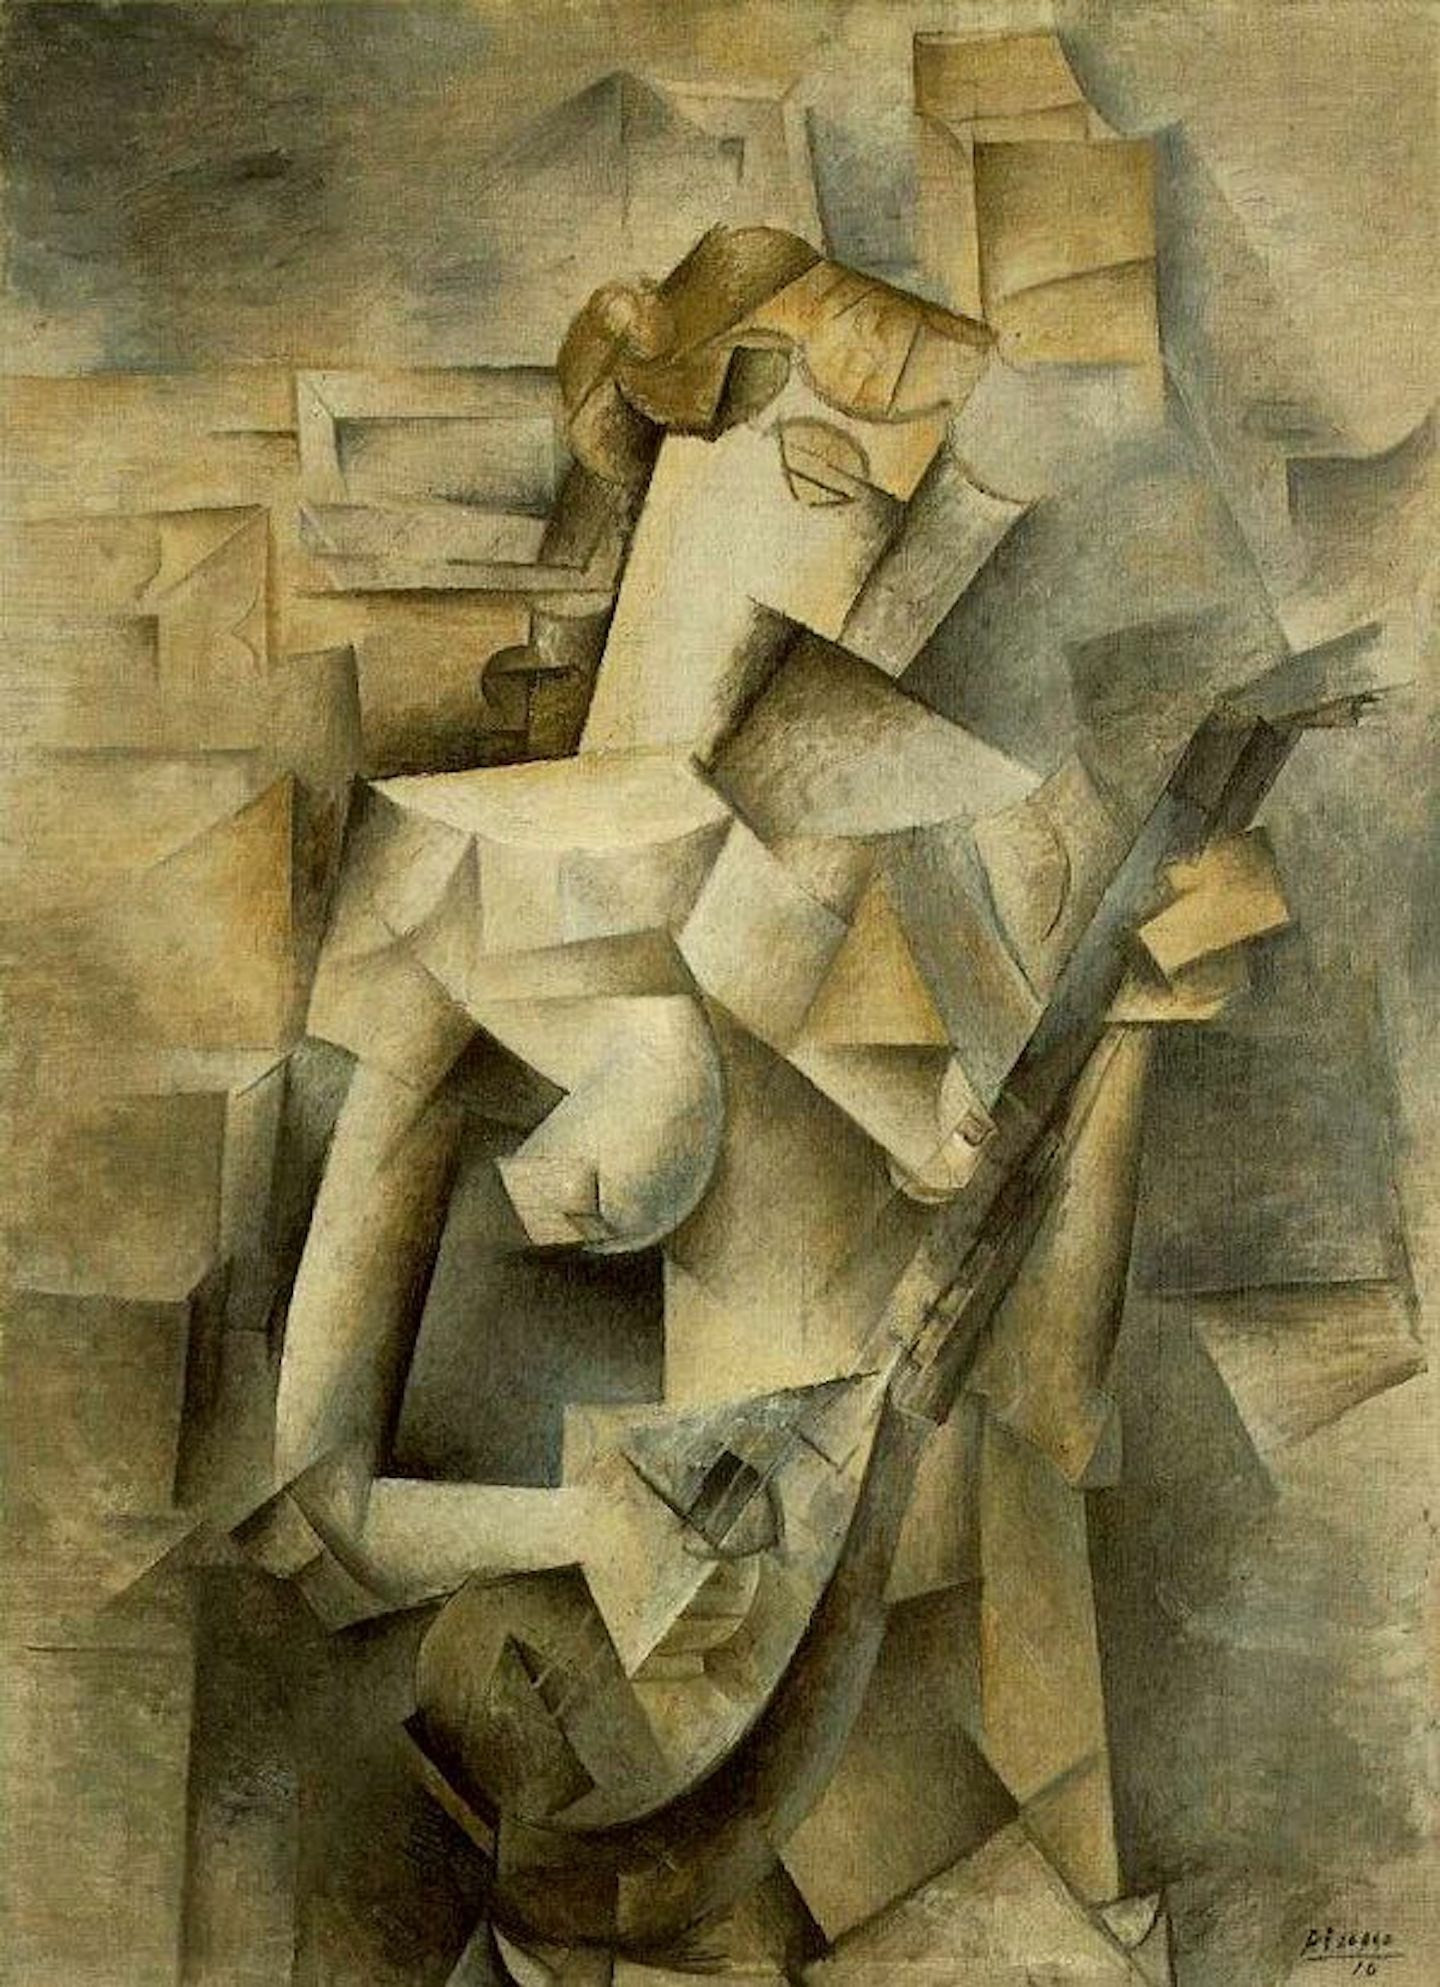 Pablo Picasso. Woman with a Mandolin. 1910 | MoMA